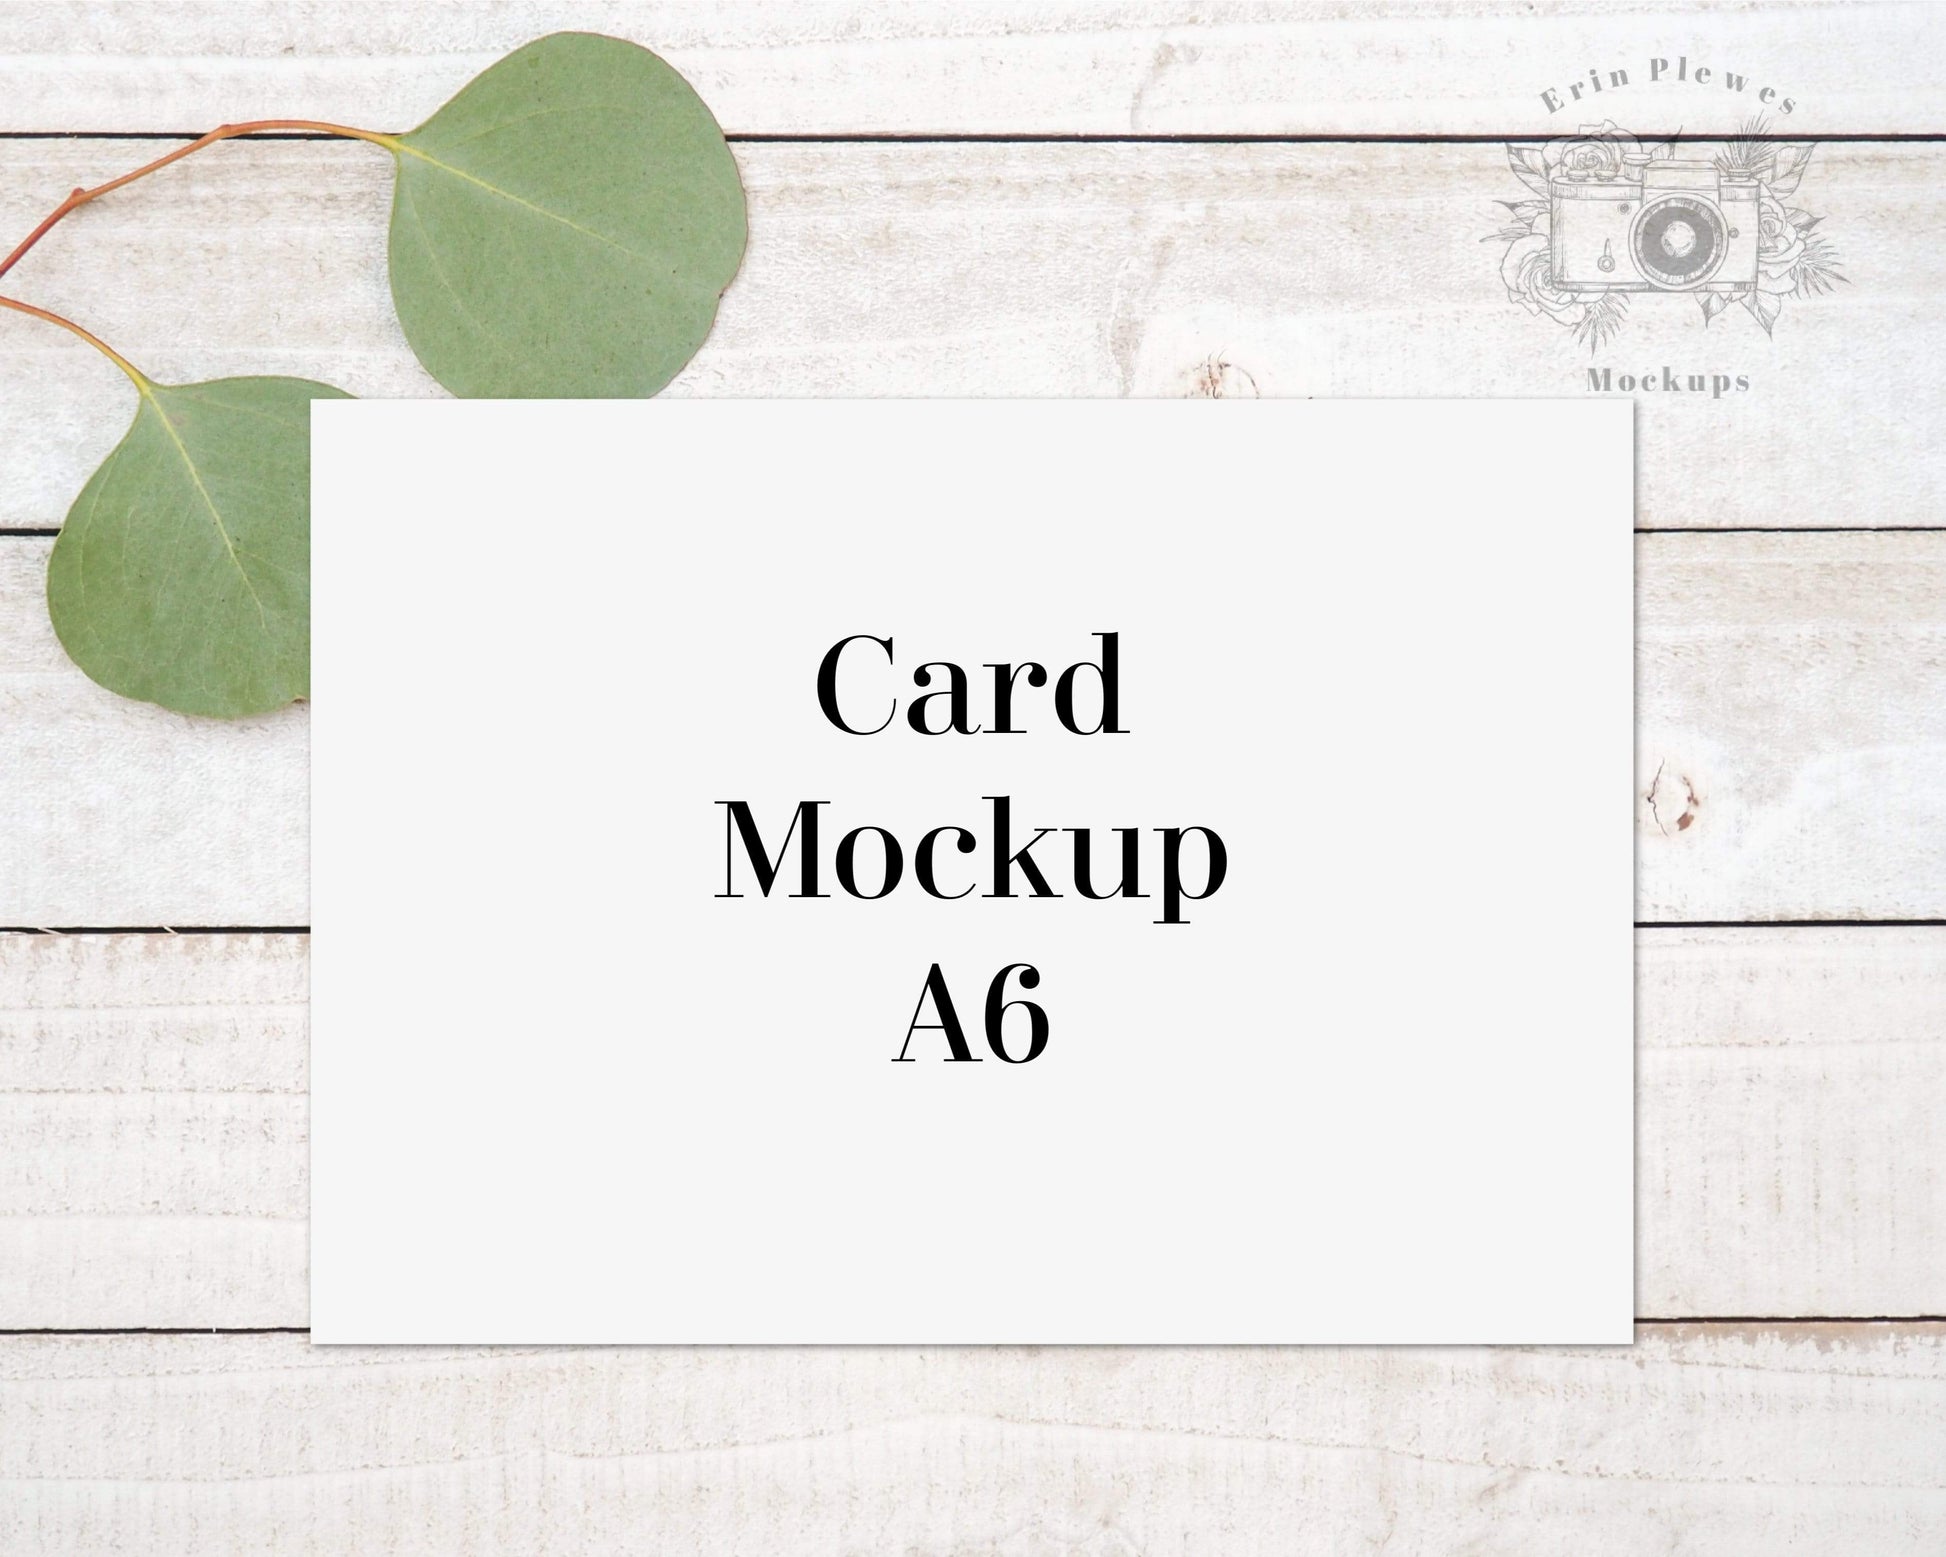 Erin Plewes Mockups A6 Greeting card mockup, Invitation mock up for rustic wedding and lifestyle stock photo, Instant Digital Download Jpeg Template